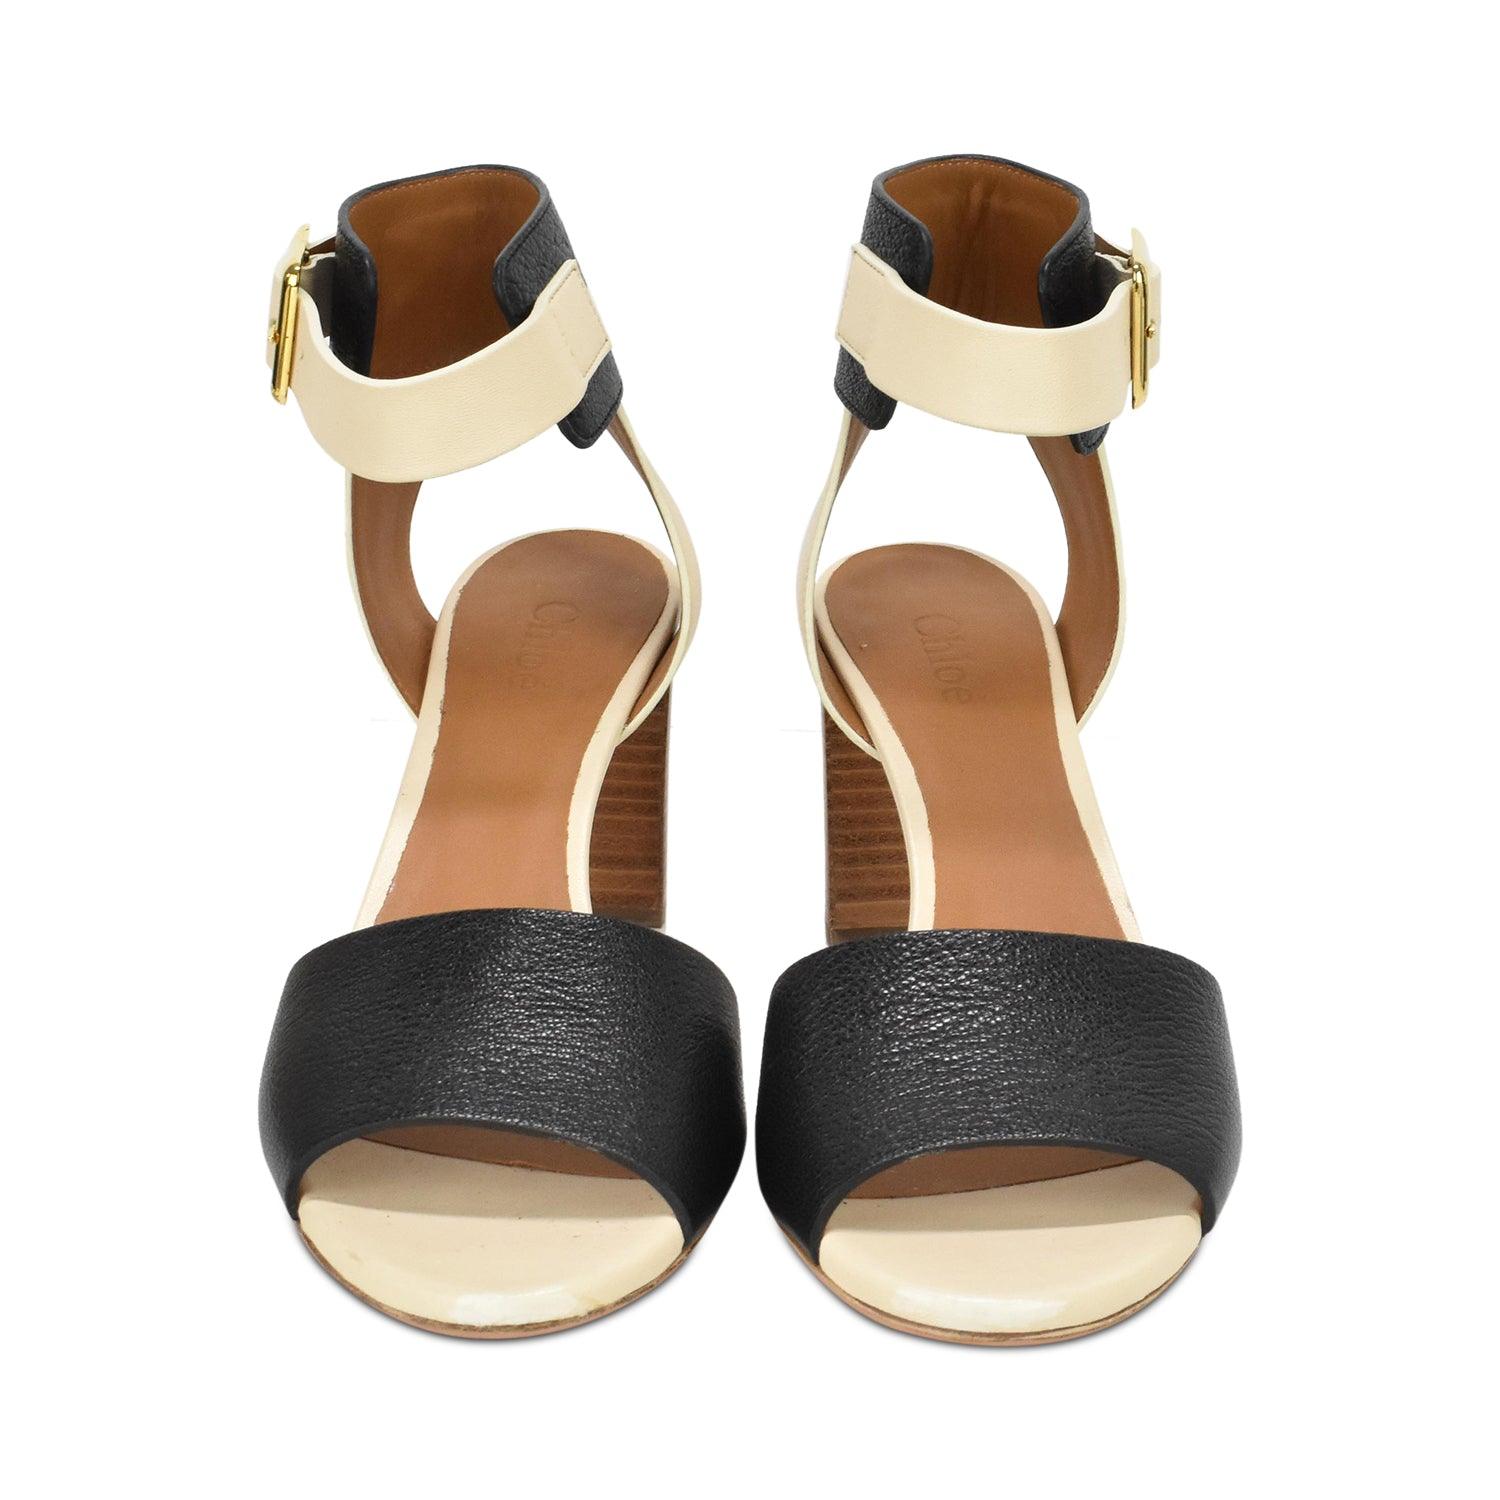 Chloe Sandals - Women's 36.5 - Fashionably Yours